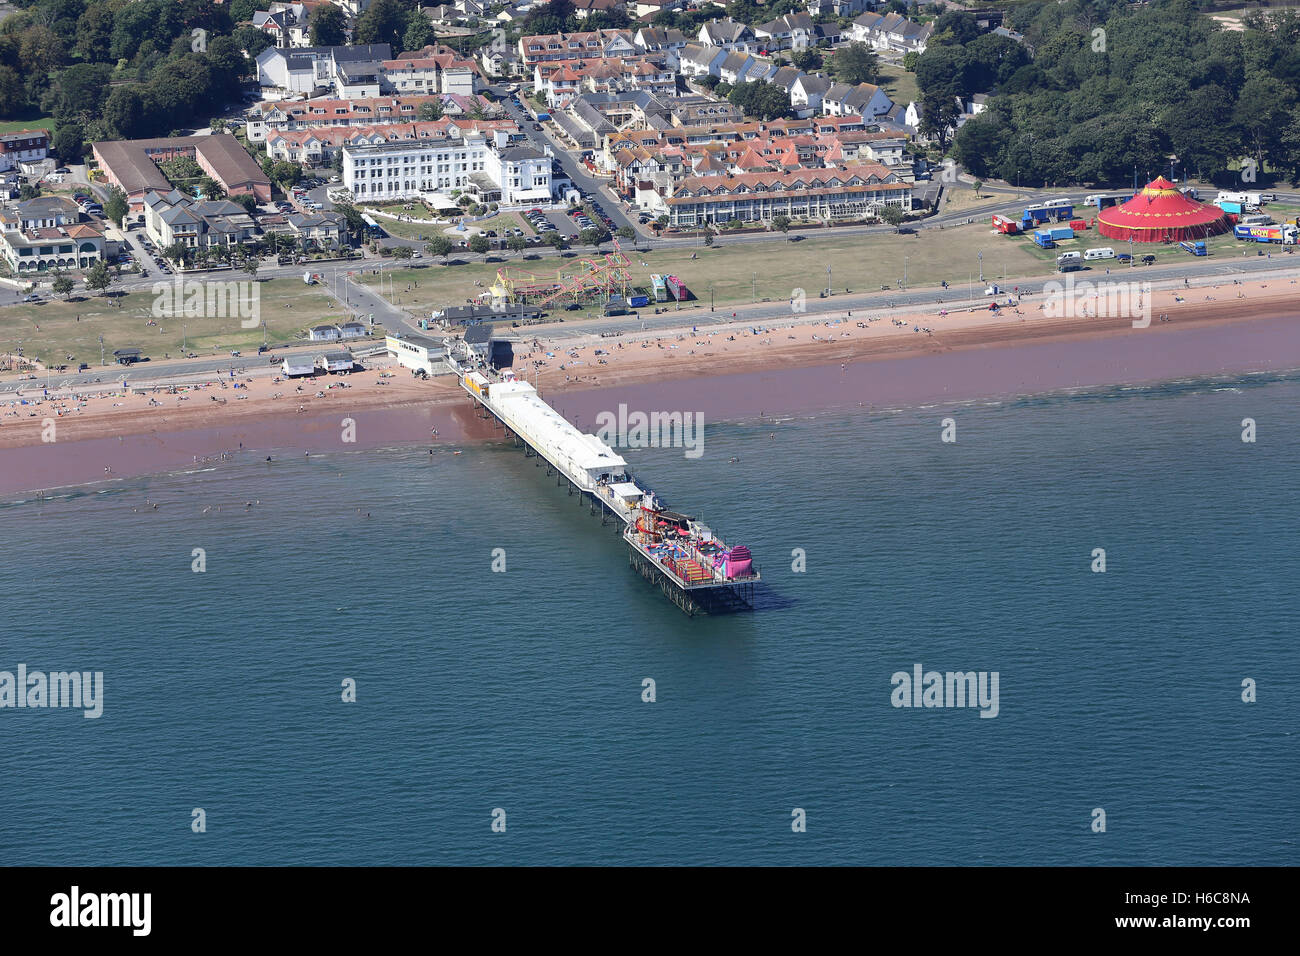 Aerial view of Paignton and its Pier Stock Photo